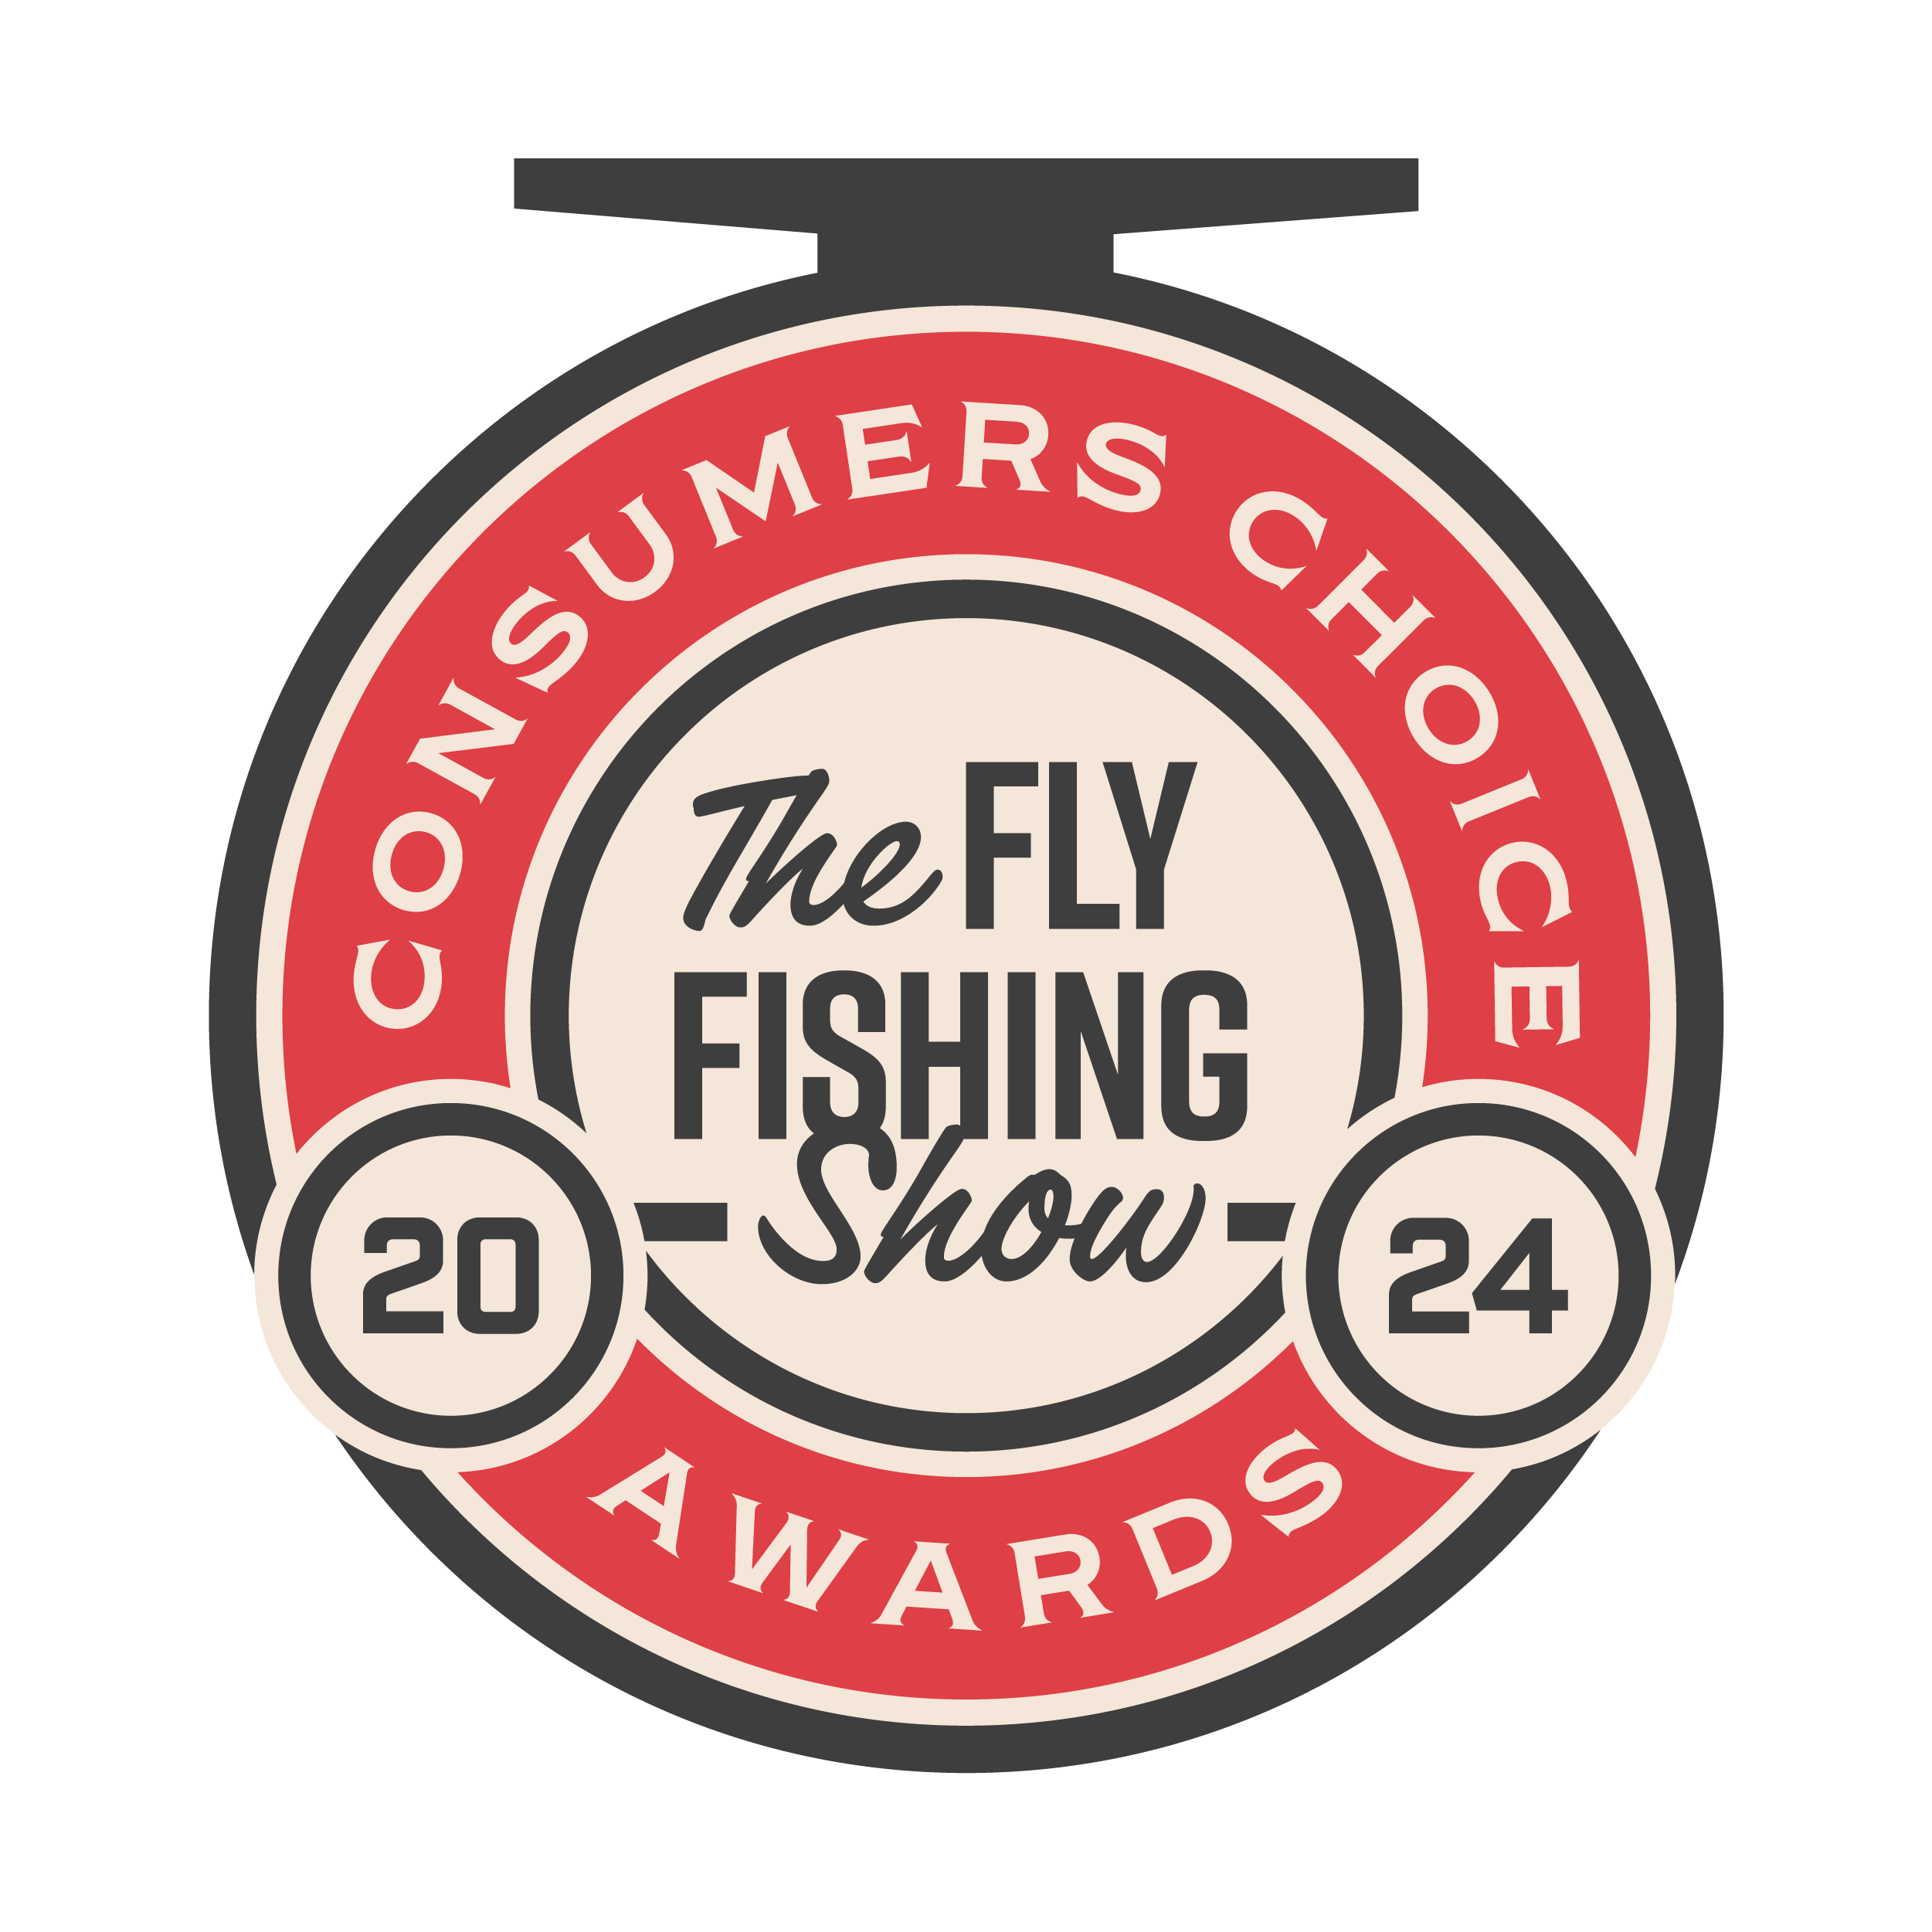 Fly rod/reel combo winner announced - Traditional Outdoors